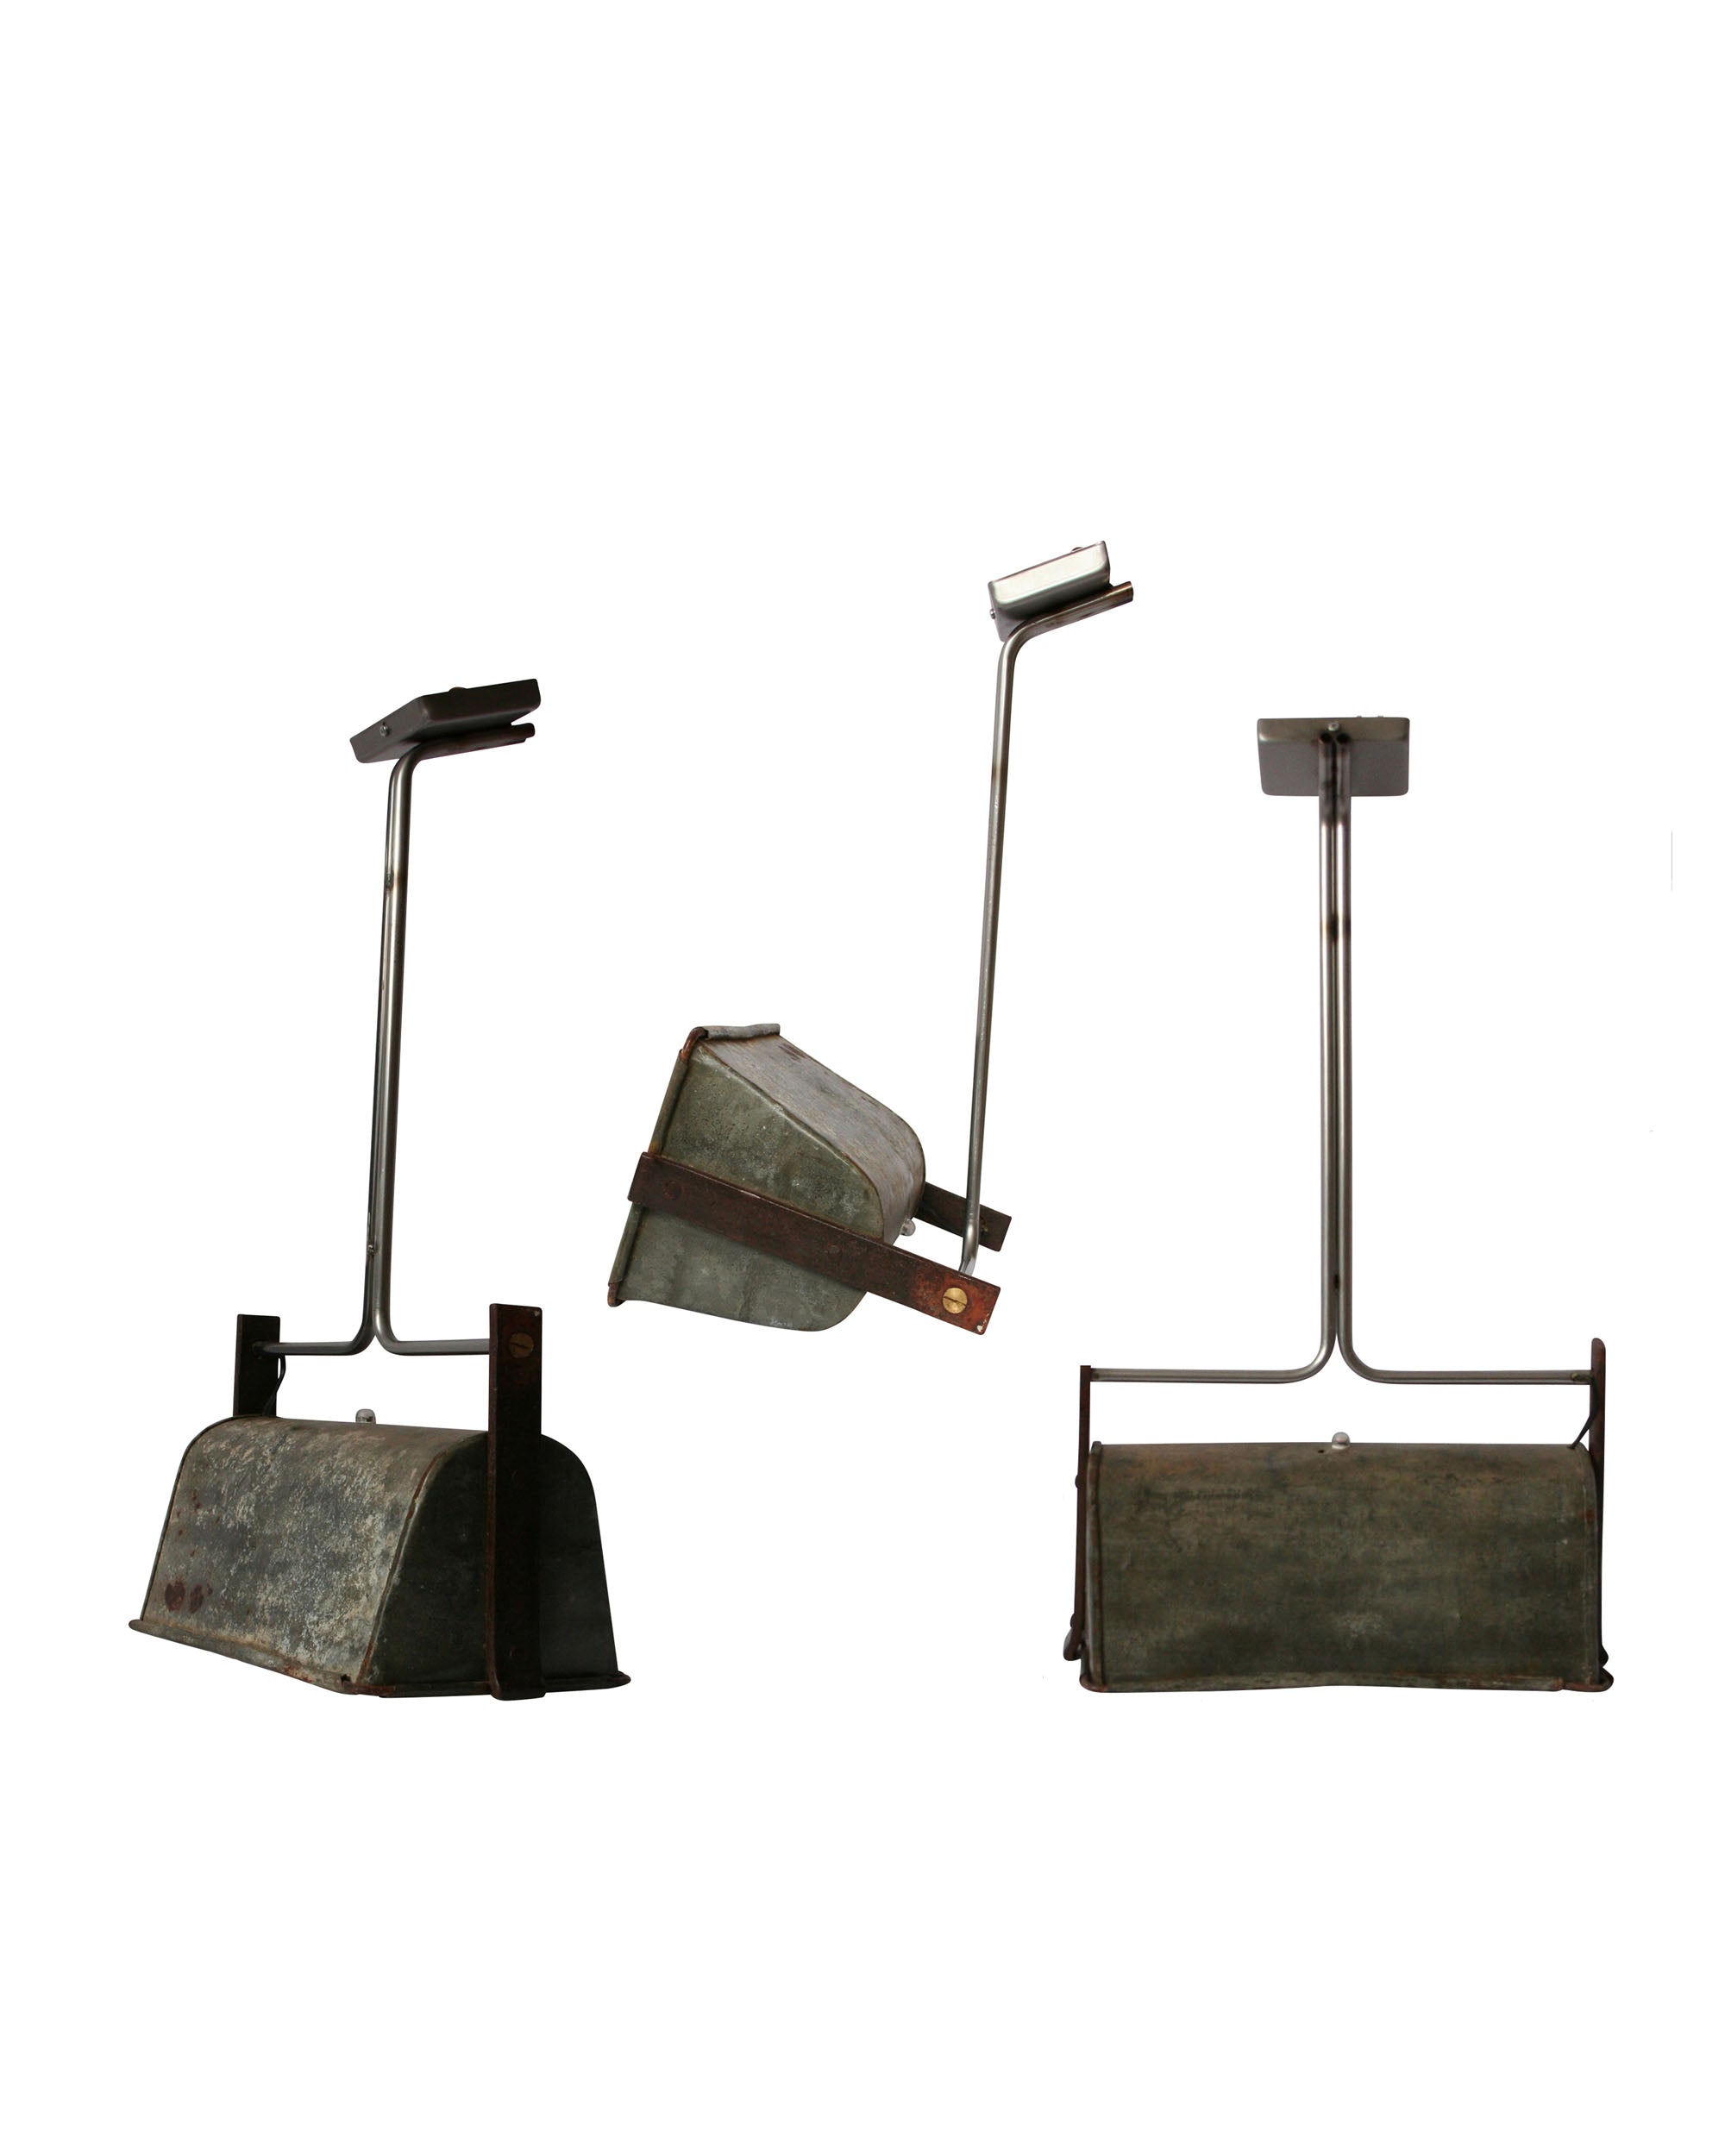 Set of three sconces made with metal buckets